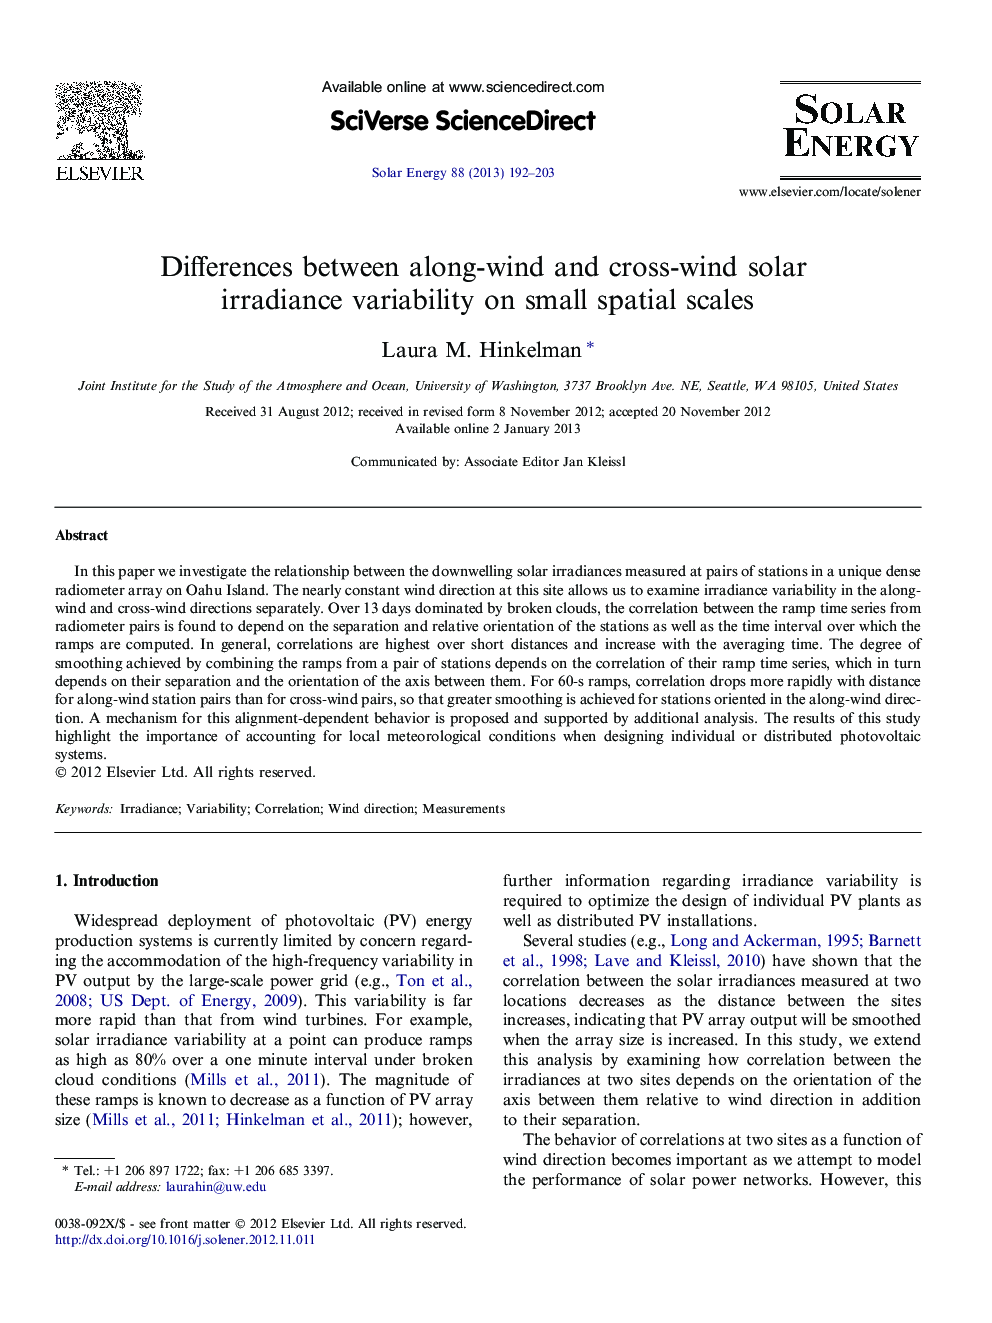 Differences between along-wind and cross-wind solar irradiance variability on small spatial scales